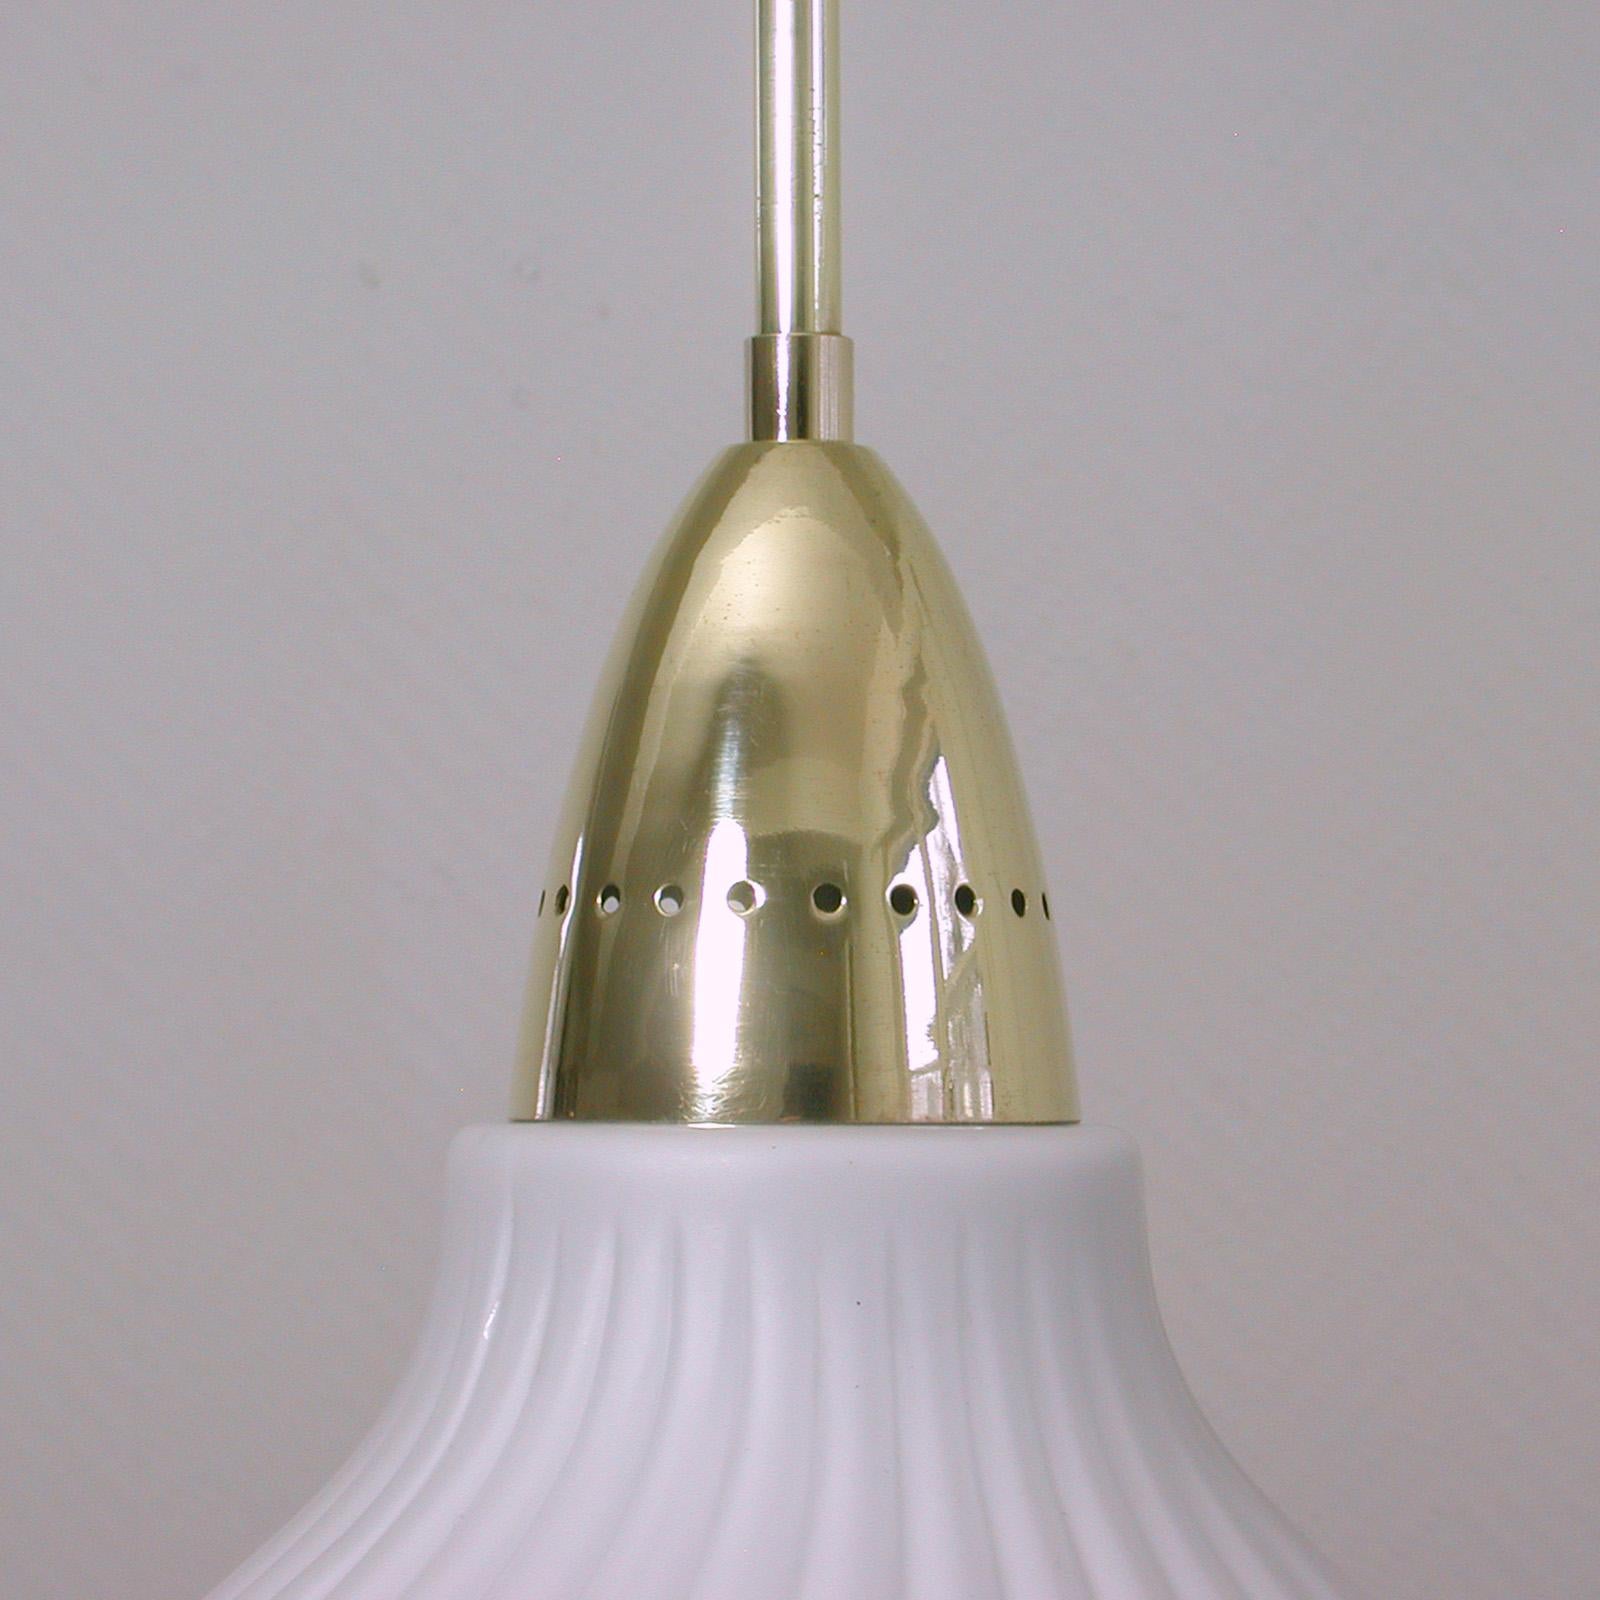 Italian Brass and Satin Opaline Glass Pendant Attributed to Arredoluce, 1950s For Sale 4